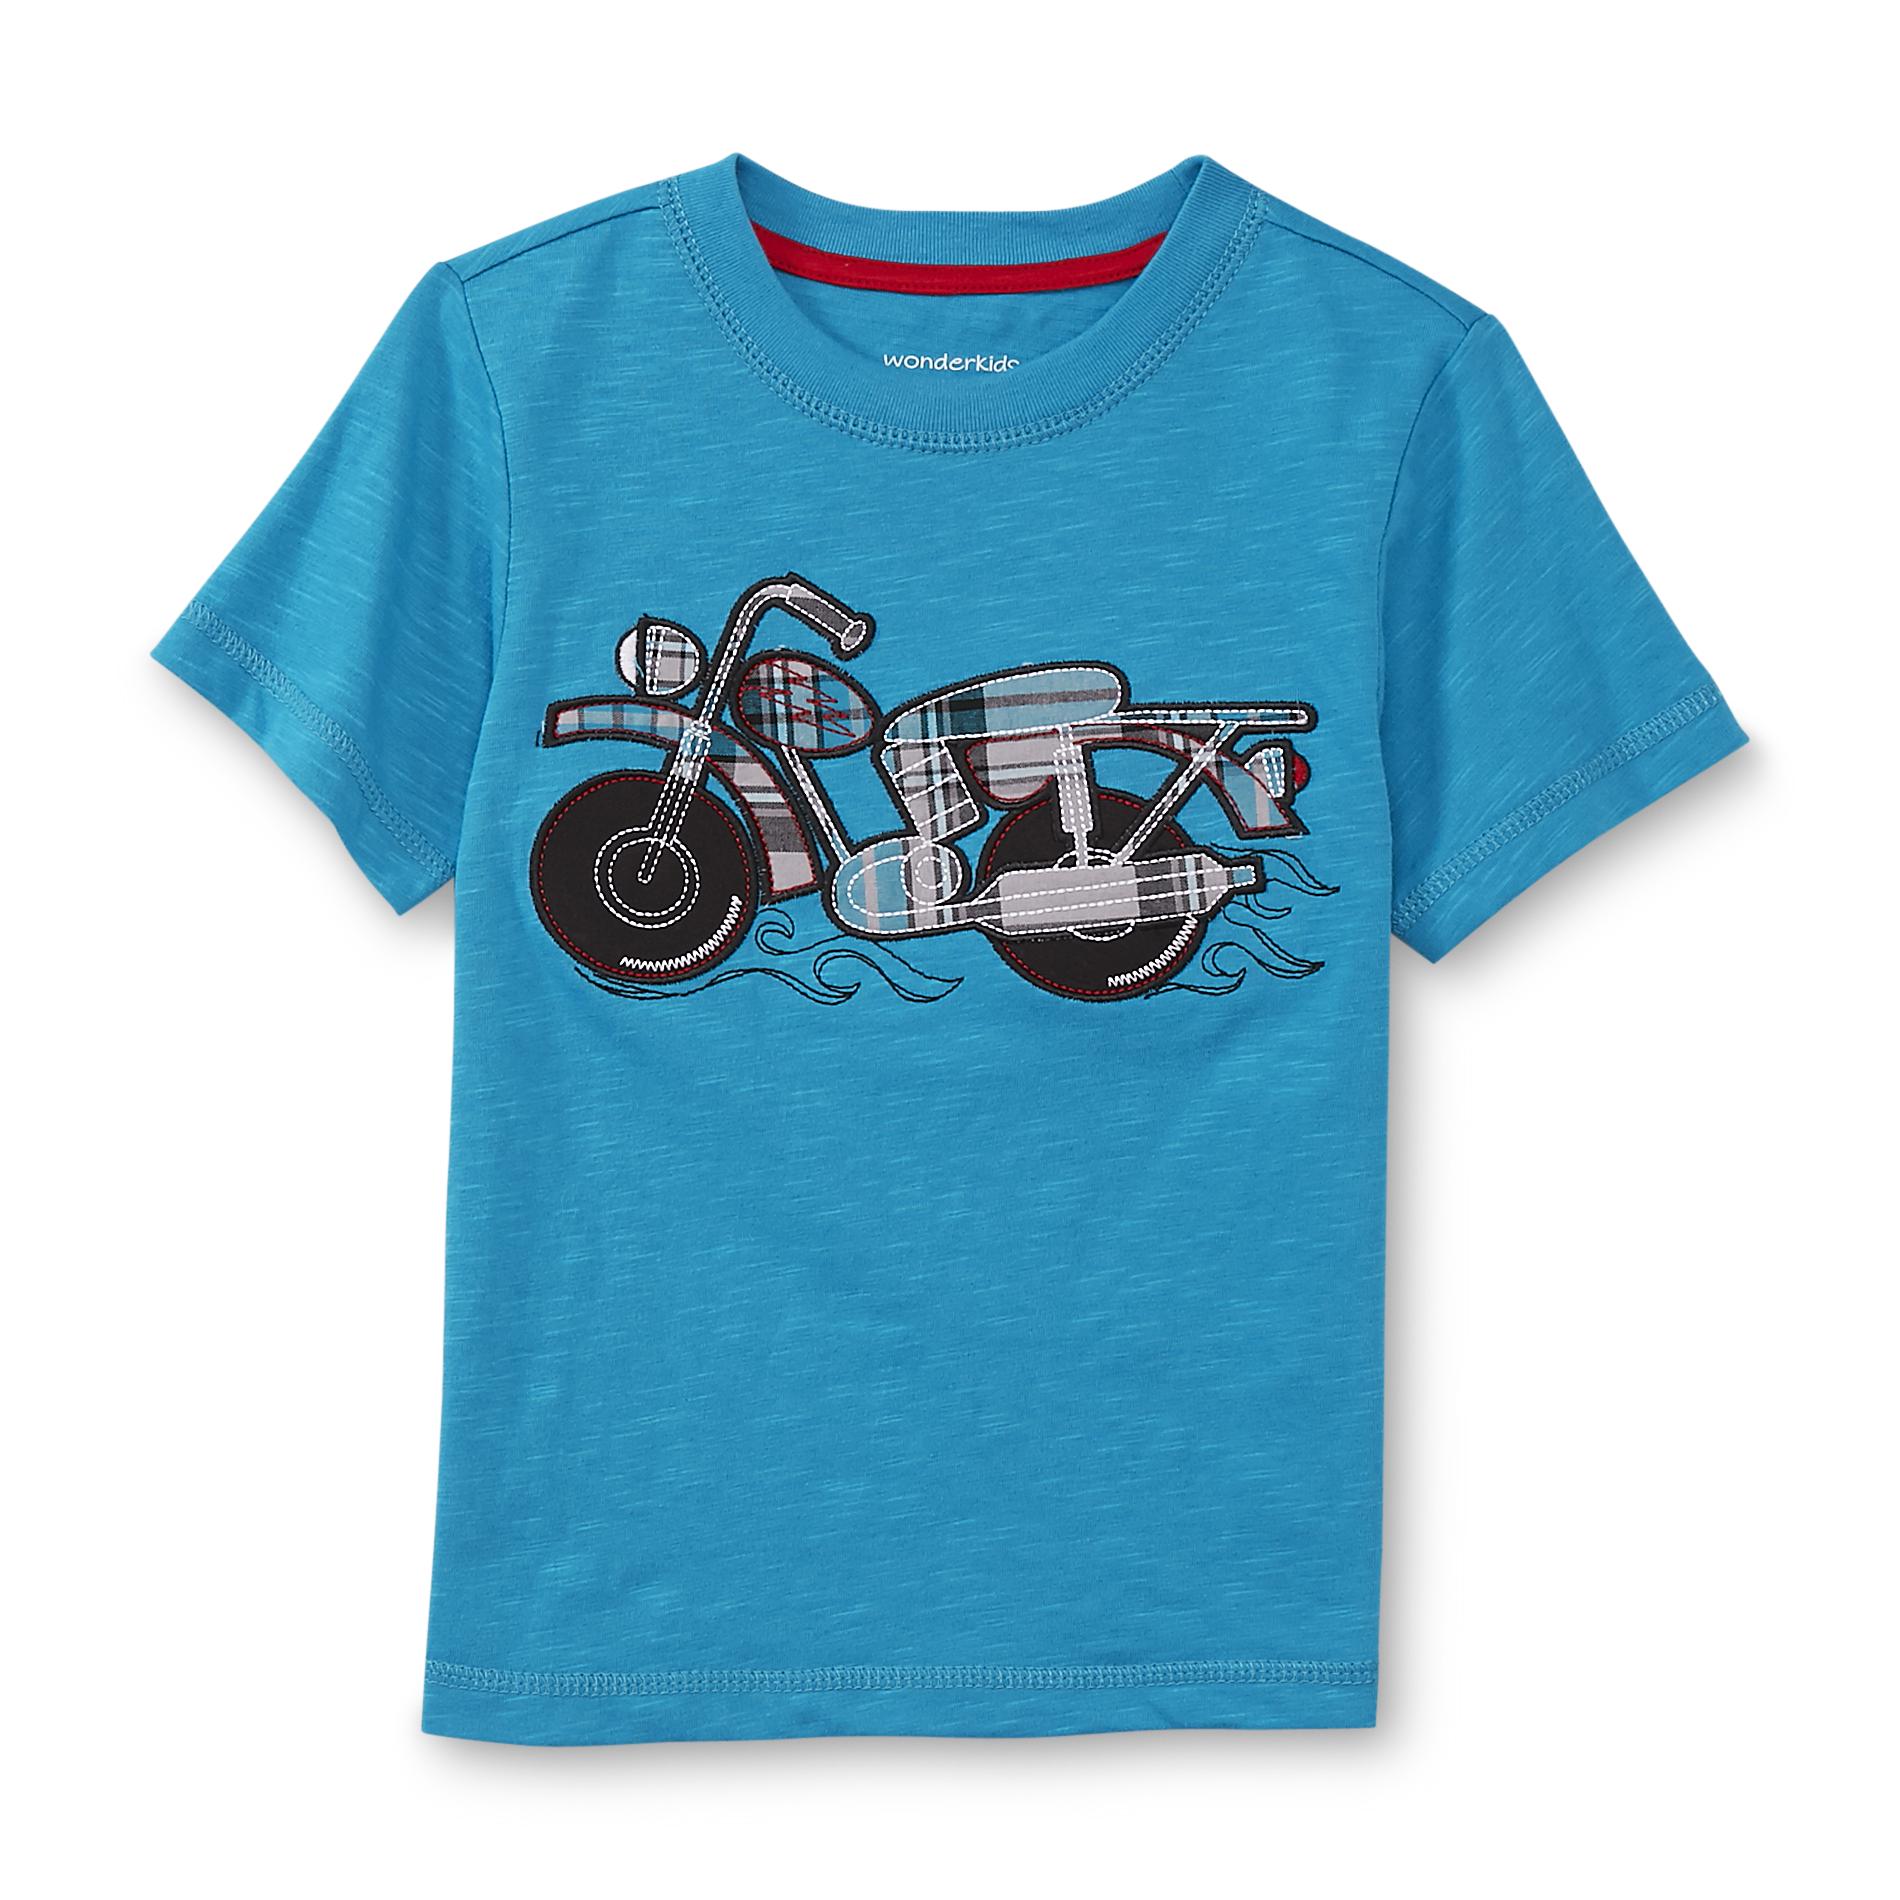 WonderKids Infant & Toddler Boy's Graphic T-Shirt - Motorcycle